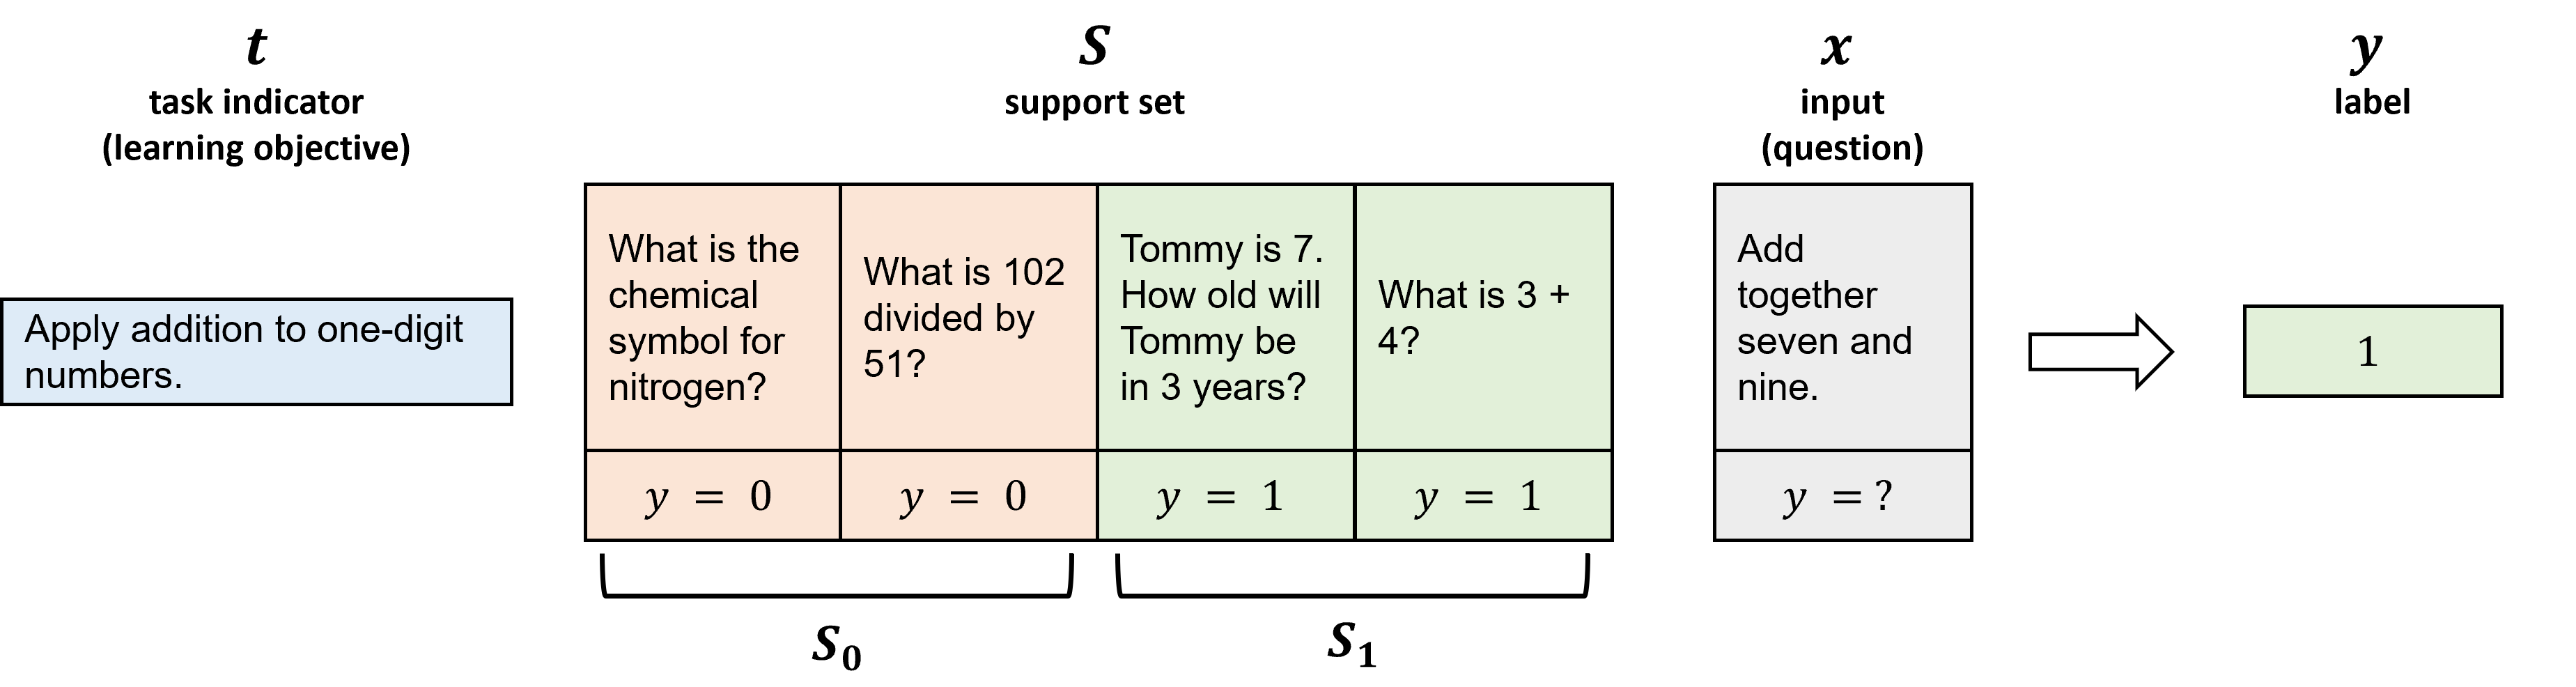 A learning goal labeled t that says "Apply addition to one-digit numbers", a question labeled with y = 0 that says "What is the chemical symbol for nitrogen?", a question labeled with y = 1 that says "Tommy is 7. How old will Tommy be in 3 years?". The two questions together are labeled with S. Following S, a question labeled x says "Add together seven and nine.". Lastly, an arrow goes from t, S, and x to a label y, which has a box with the number 1 inside.